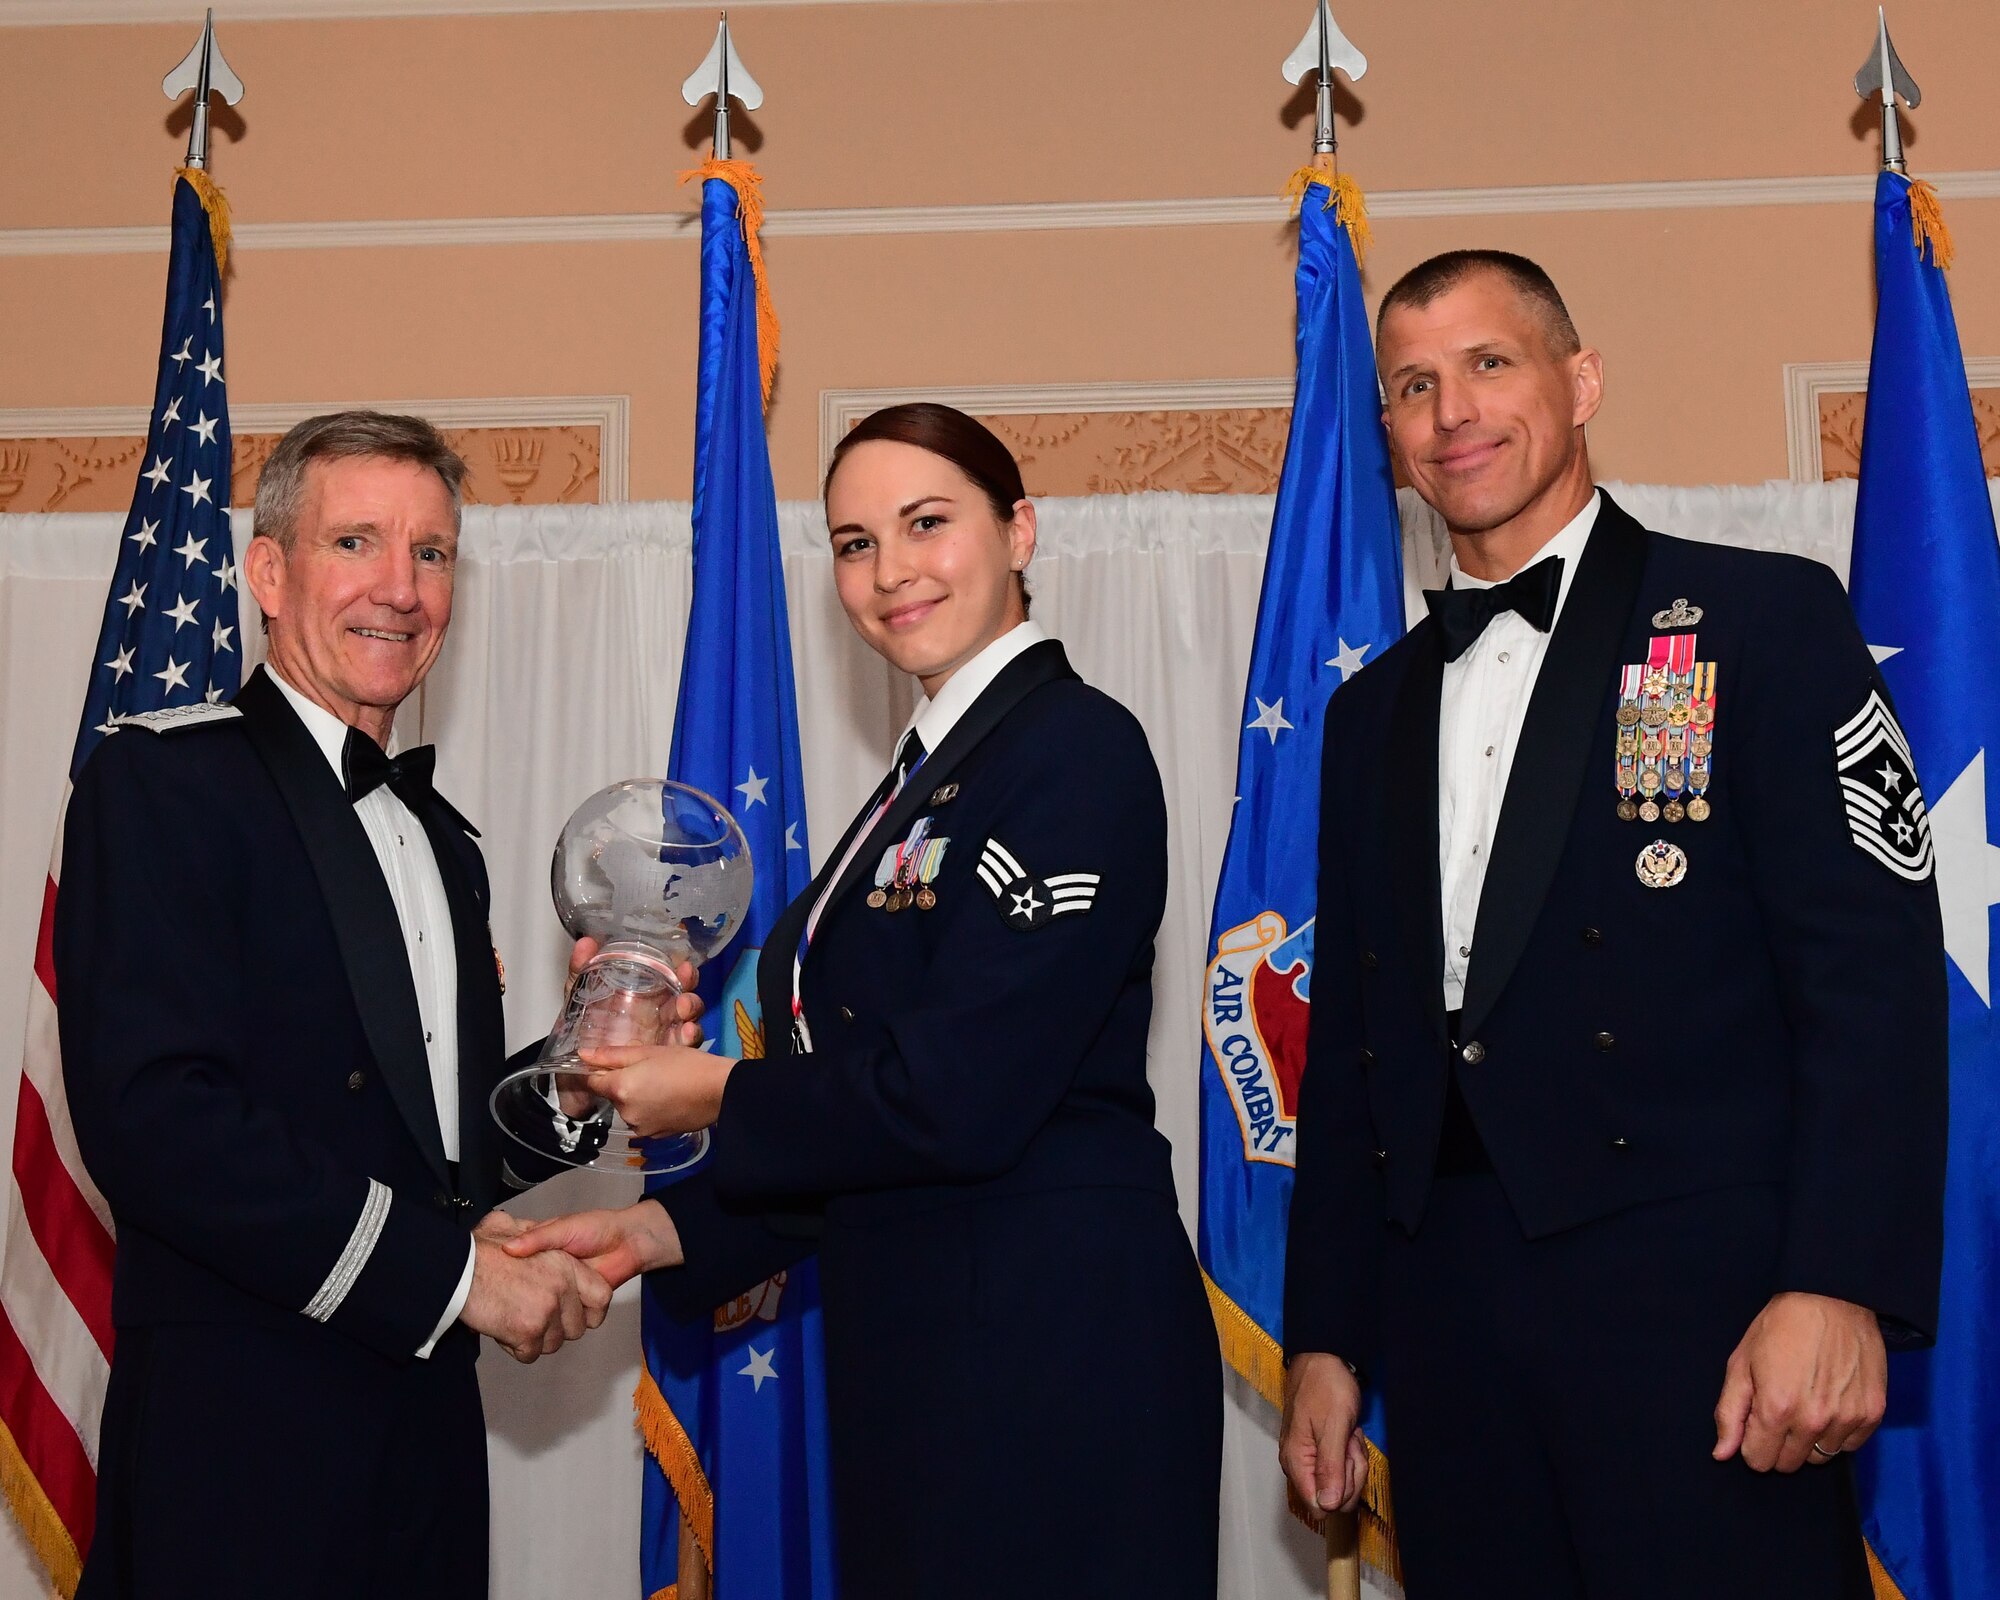 Gen. Hawk Carlisle, commander, Air Combat Command presents an award to Senior Airman Liae Hess, 355th Fighter Wing air traffic controller, Davis-Monthan Air Force Base, Arizona, as Chief Master Sgt. Steve McDonald, command chief, ACC observes during the 2017 Outstanding Airmen of the Year banquet at the Bayview Community Center at  Langley AFB, Virginia, March 8, 2017. The award recognizes 12 outstanding enlisted service members for superior leadership, job performance, community involvement and personal achievements. (U.S. Air Force photo by Staff Sgt. Nick Wilson)